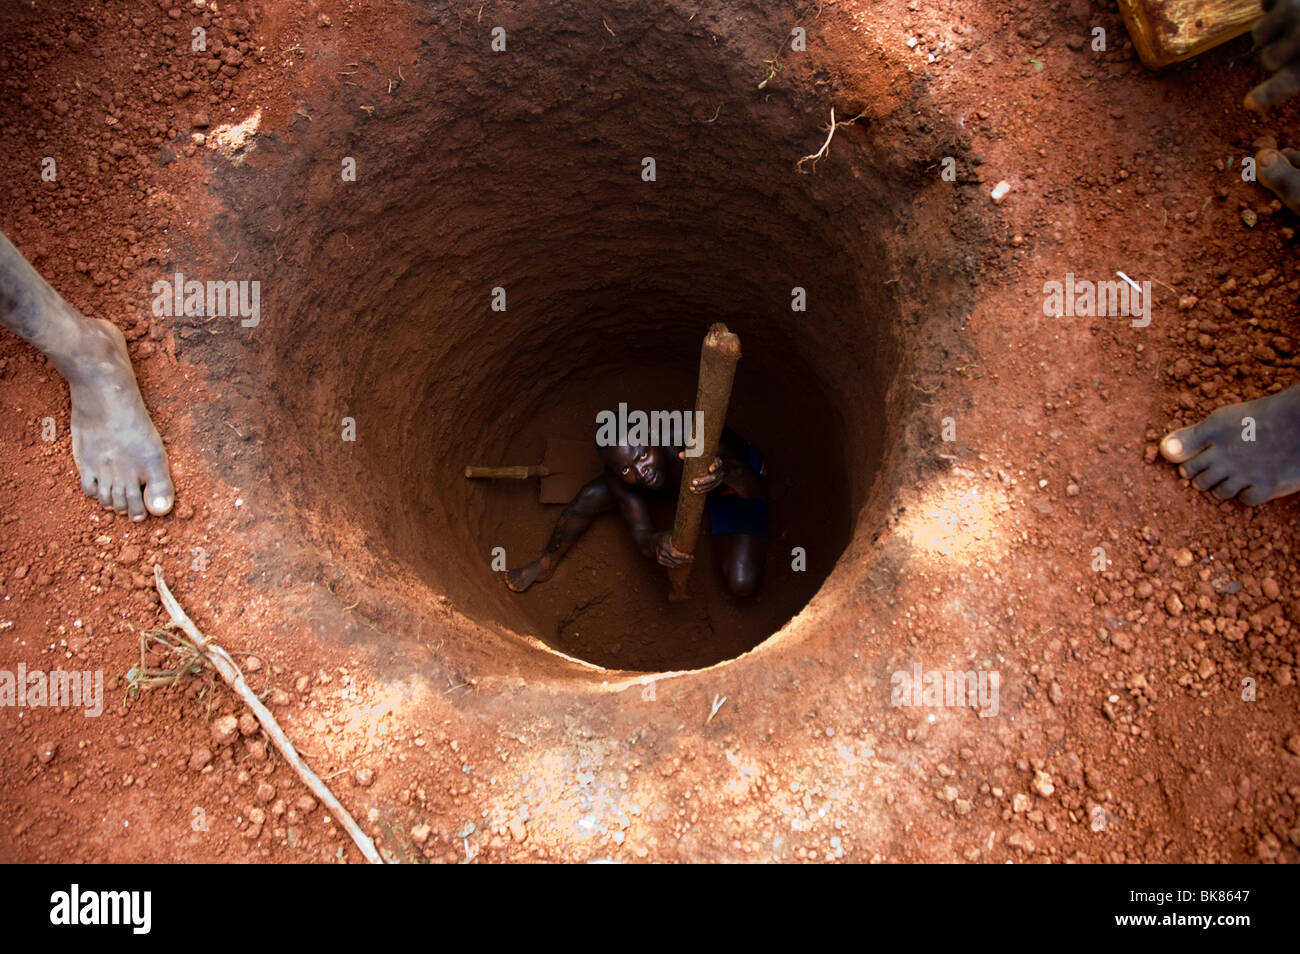 water well being dug manually Stock Photo